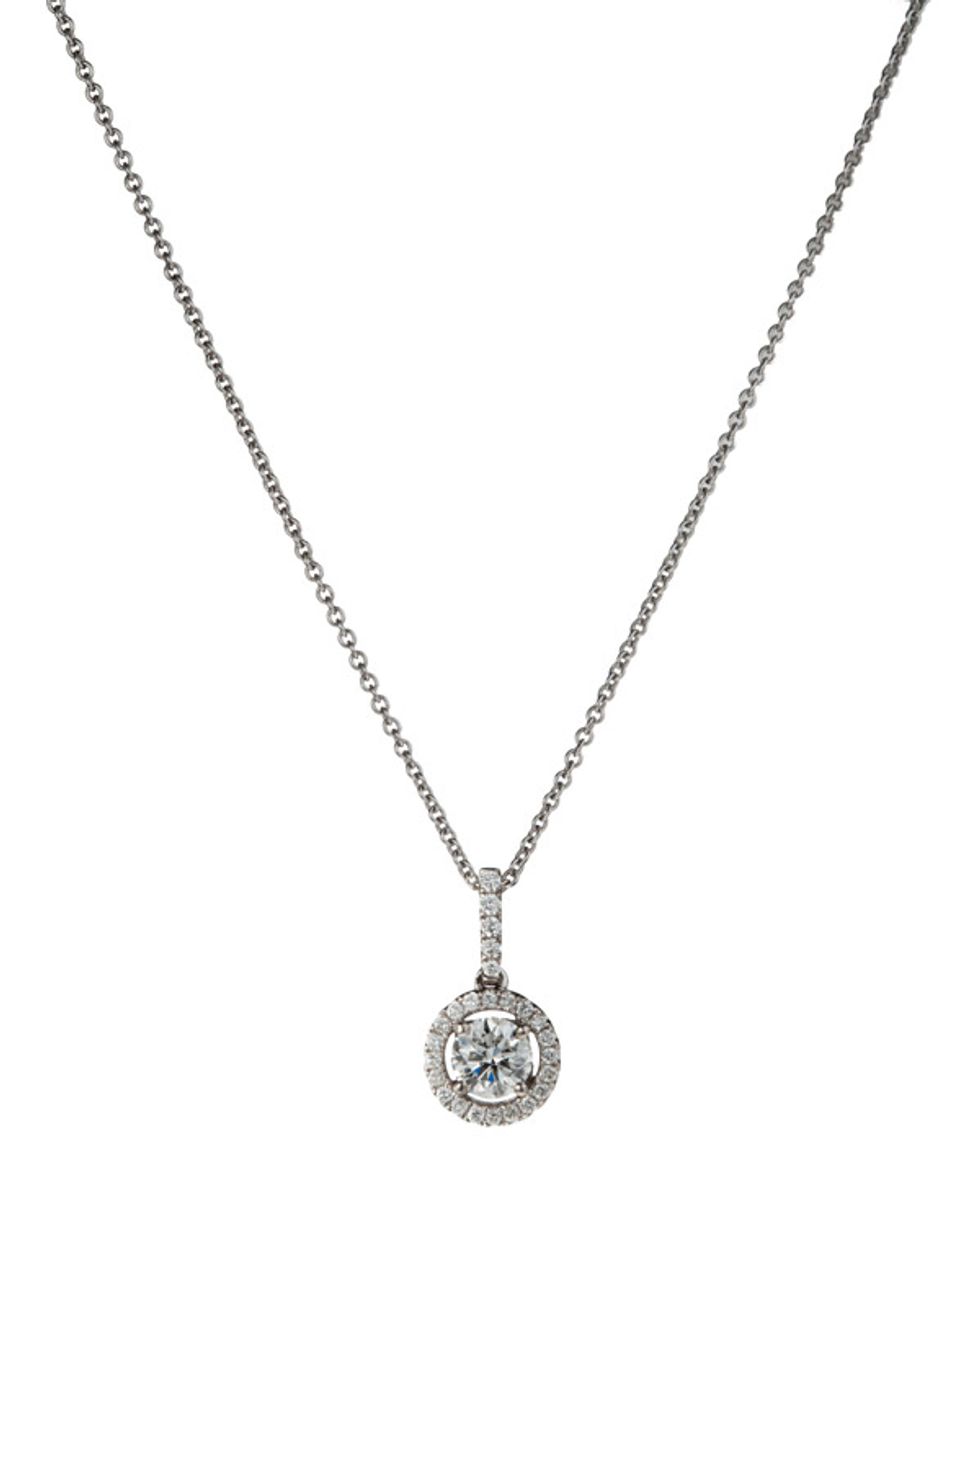 Summer Sparklers: Our Favorite Picks from the GiftCenter & JewelryMart